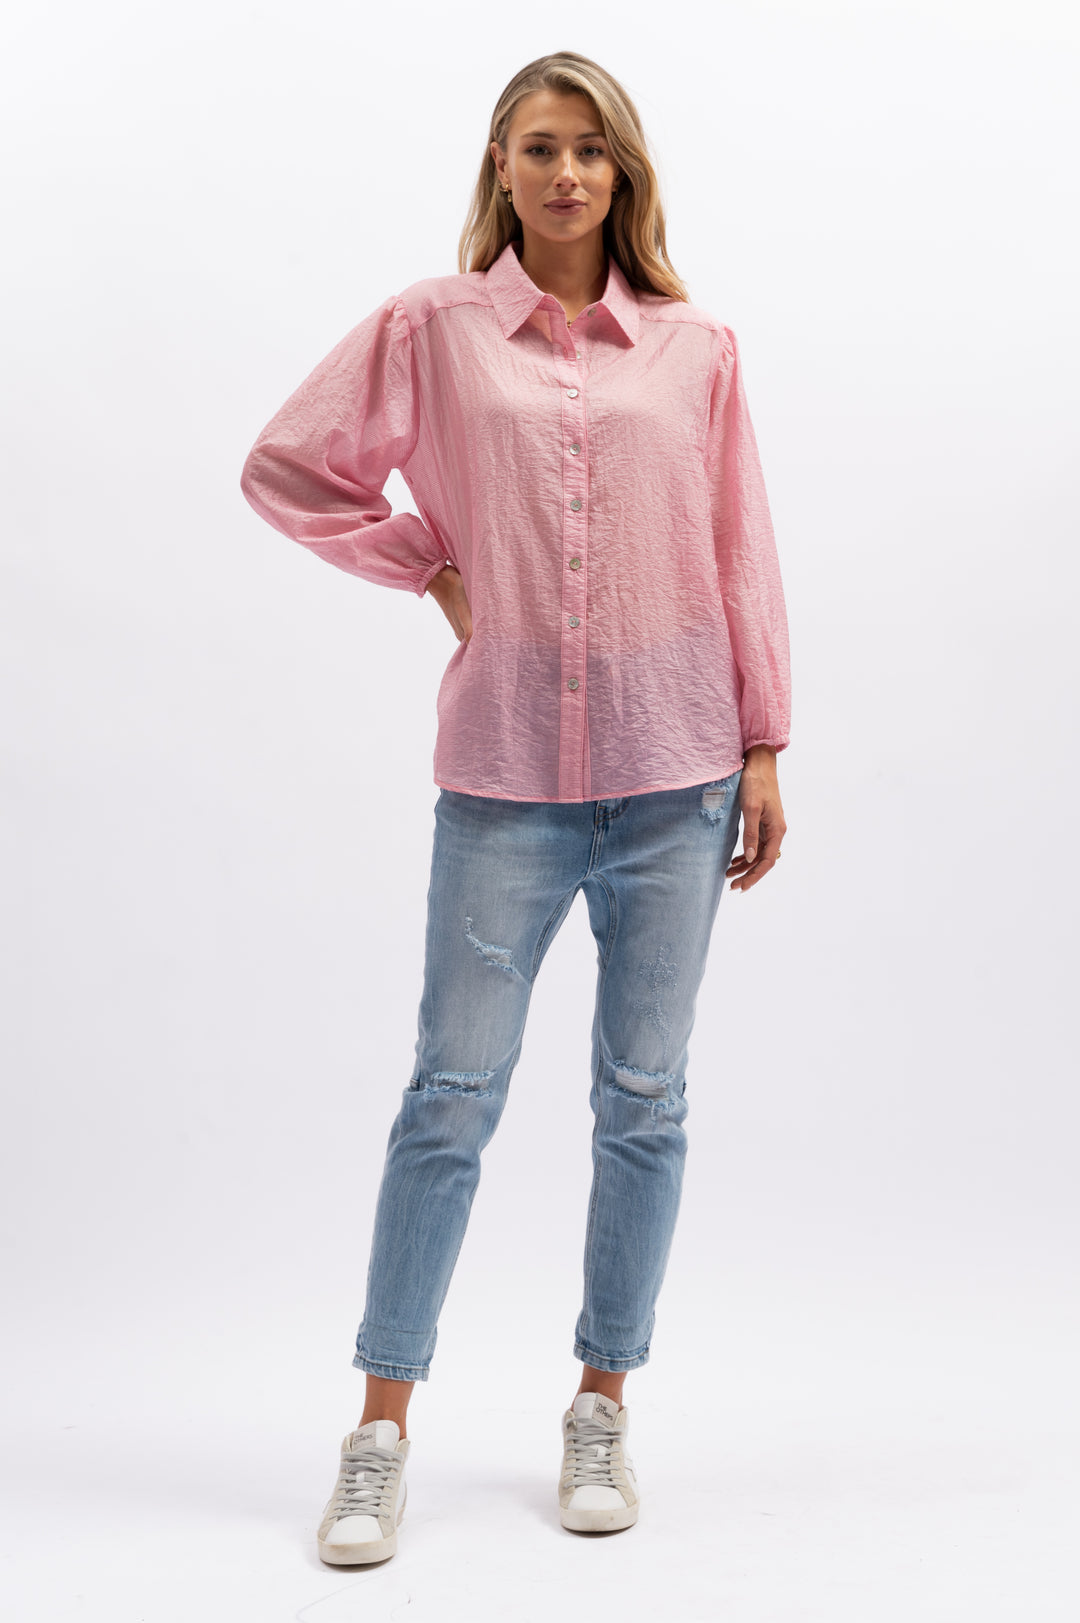 We Are The Others - Sheer Stripe Shirt Pink